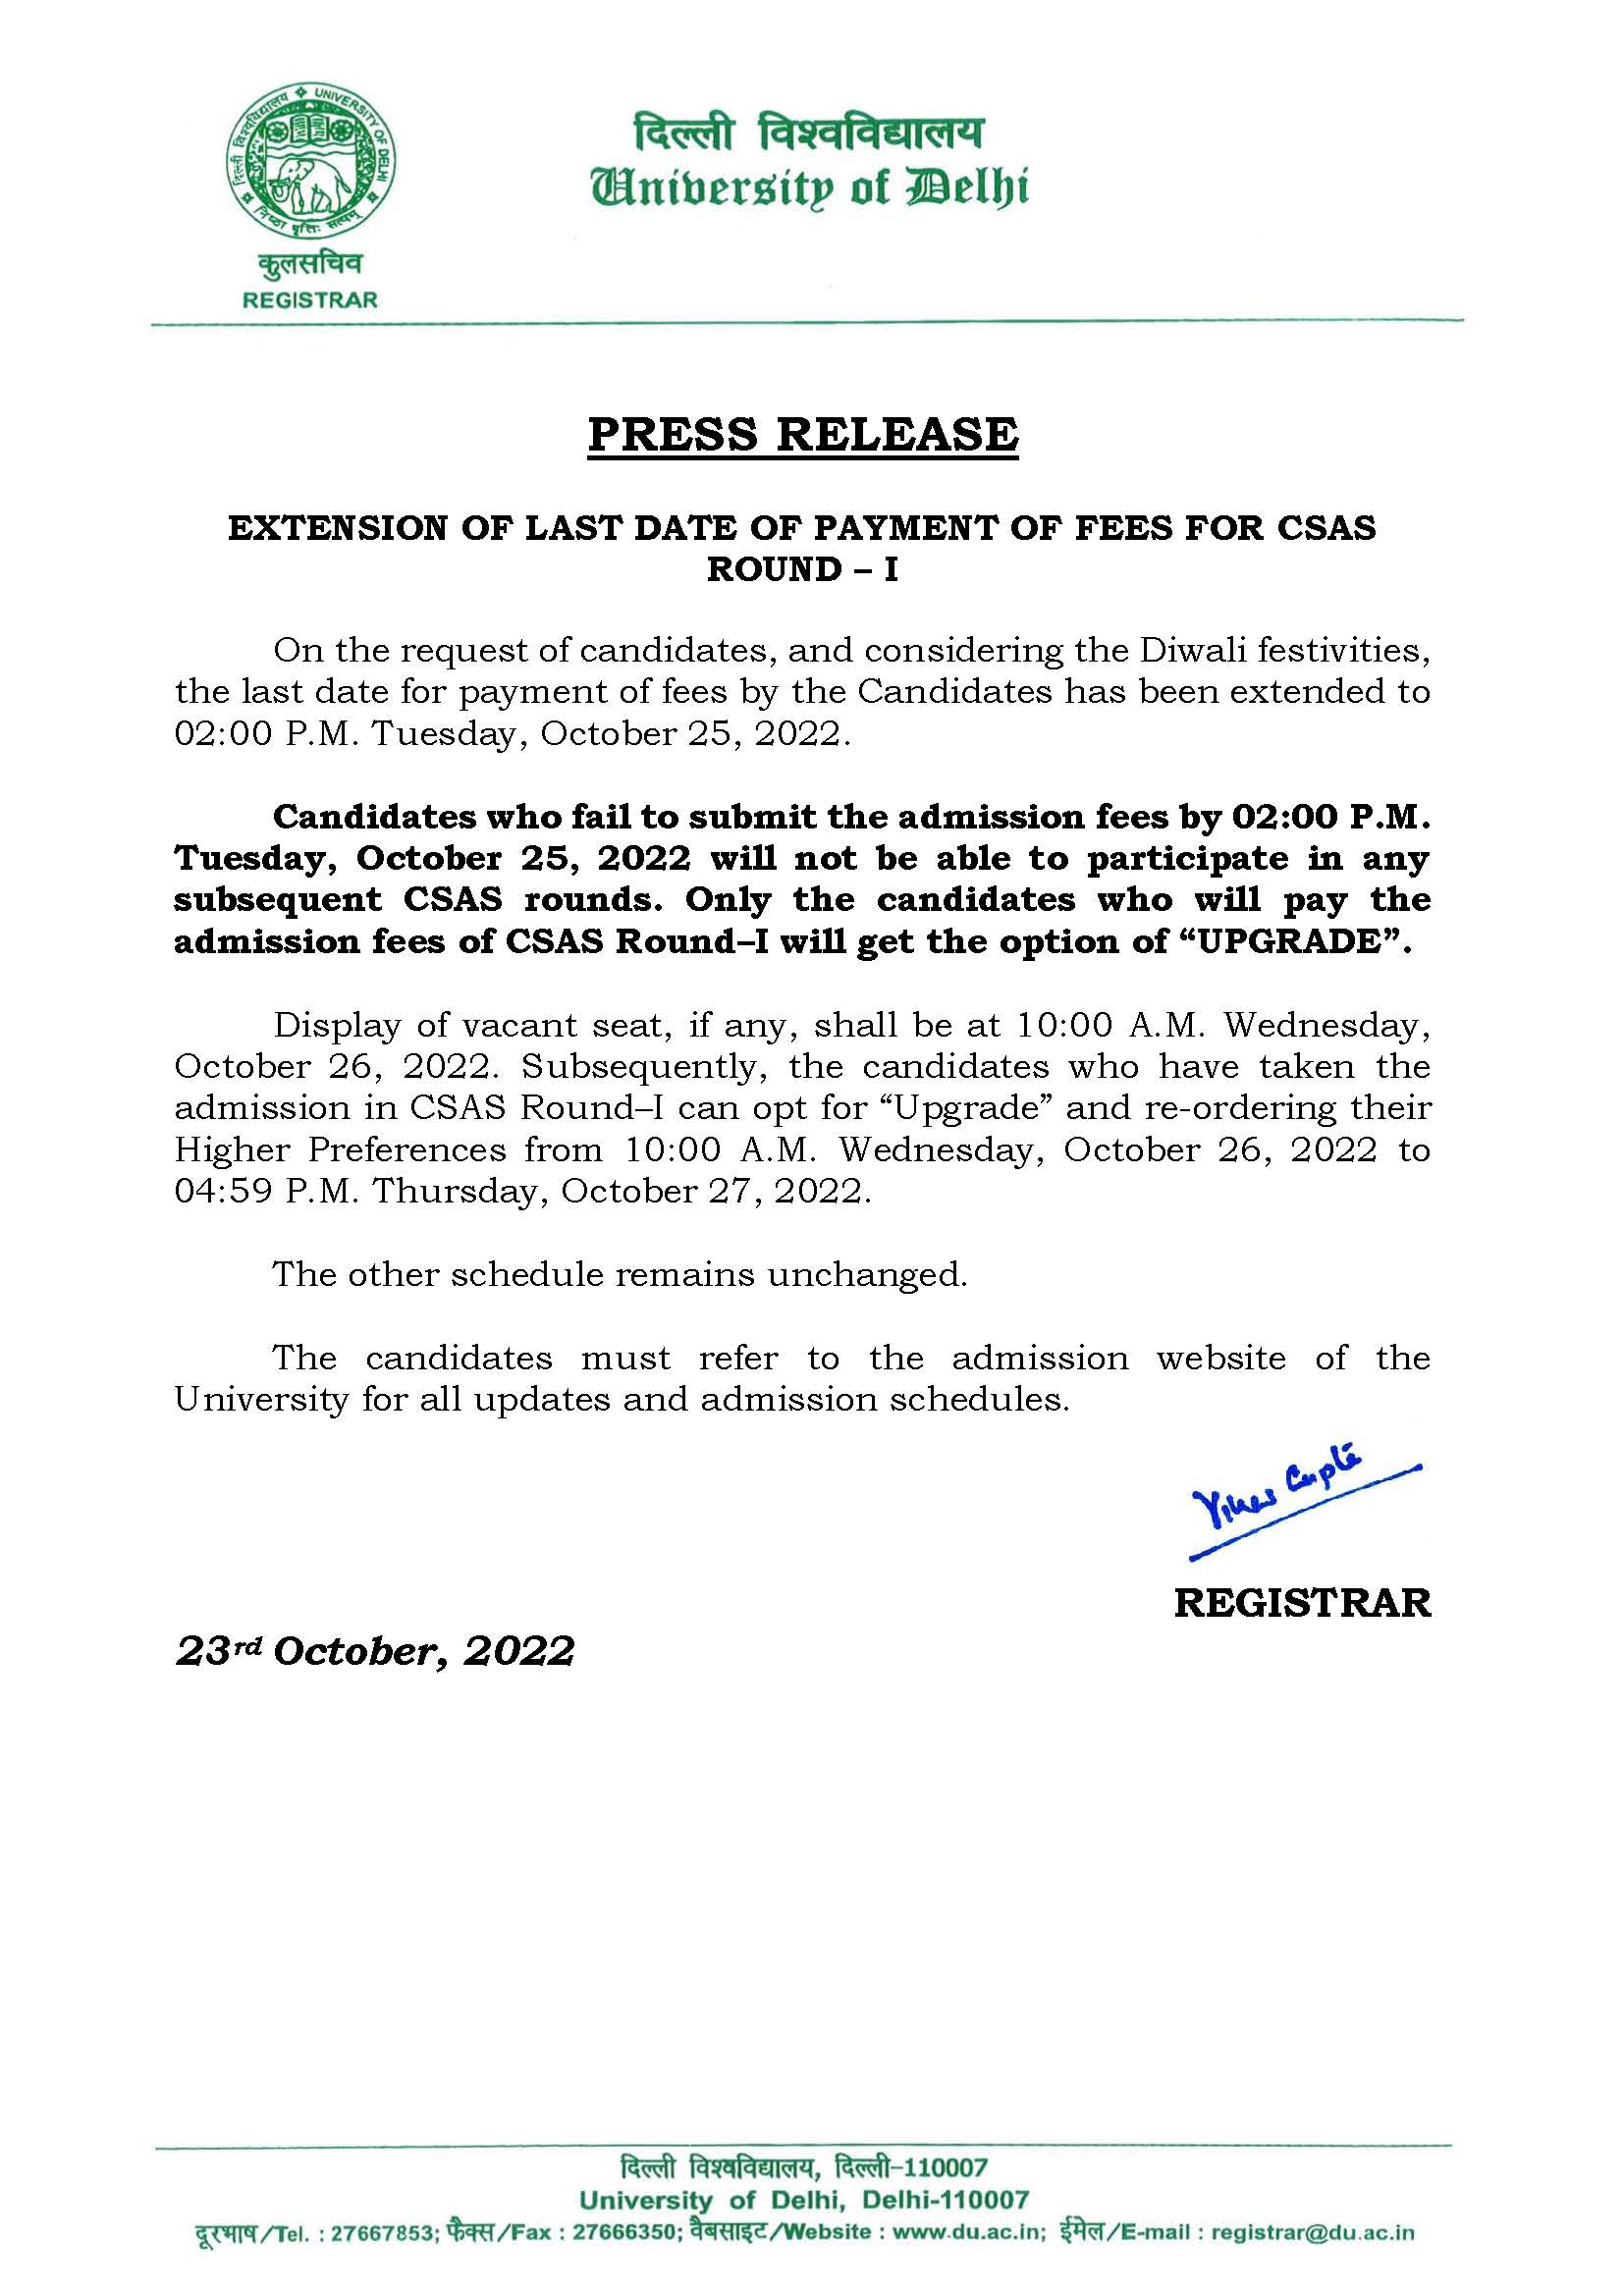 23-10-2022Press Release - Extension of last date of payment of fee for CSAS First Round - DU